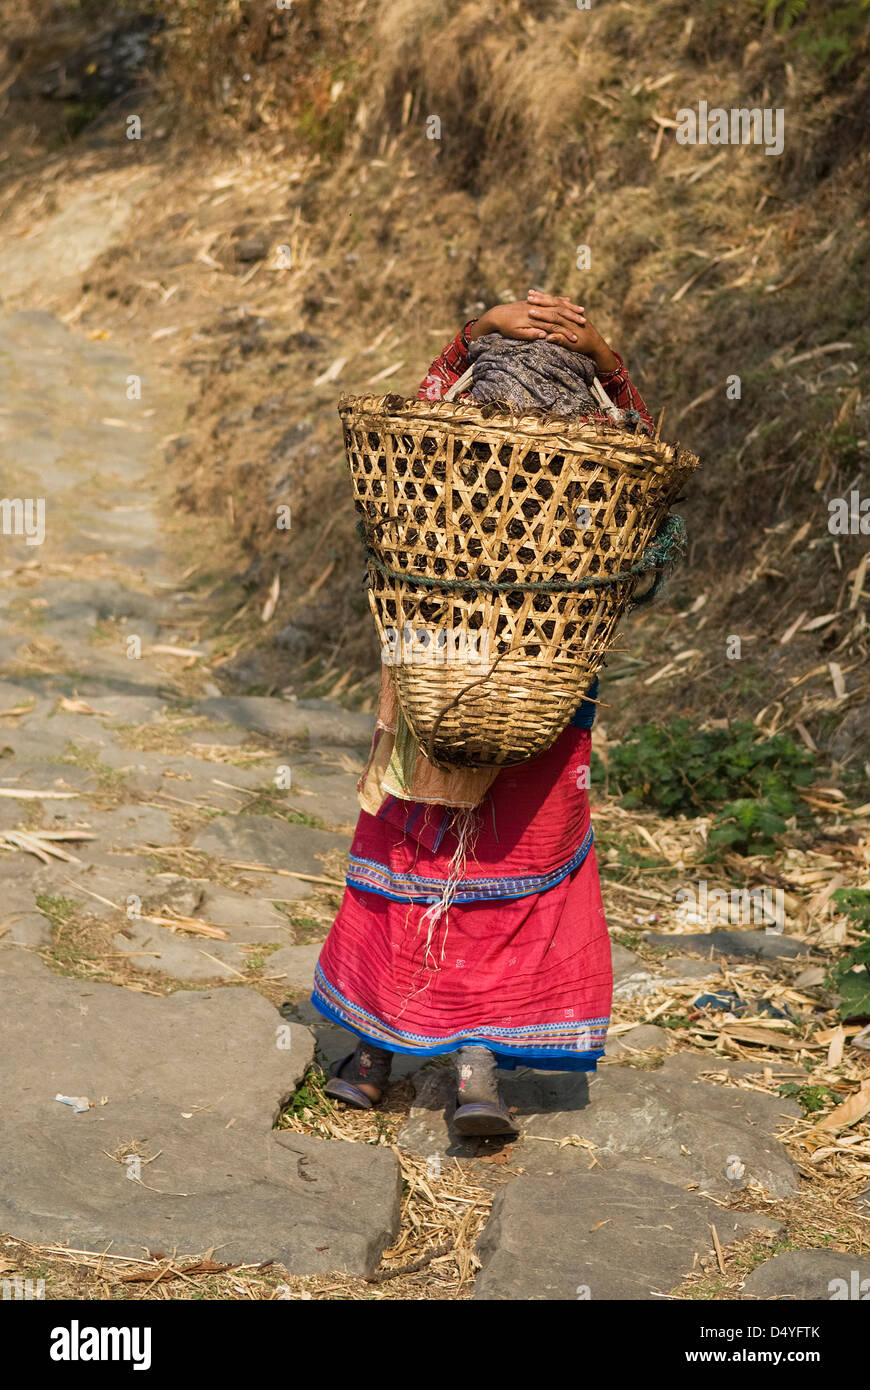 Nepal, Annapurna. A local woman follows a trail carrying a basket called a doko. Stock Photo